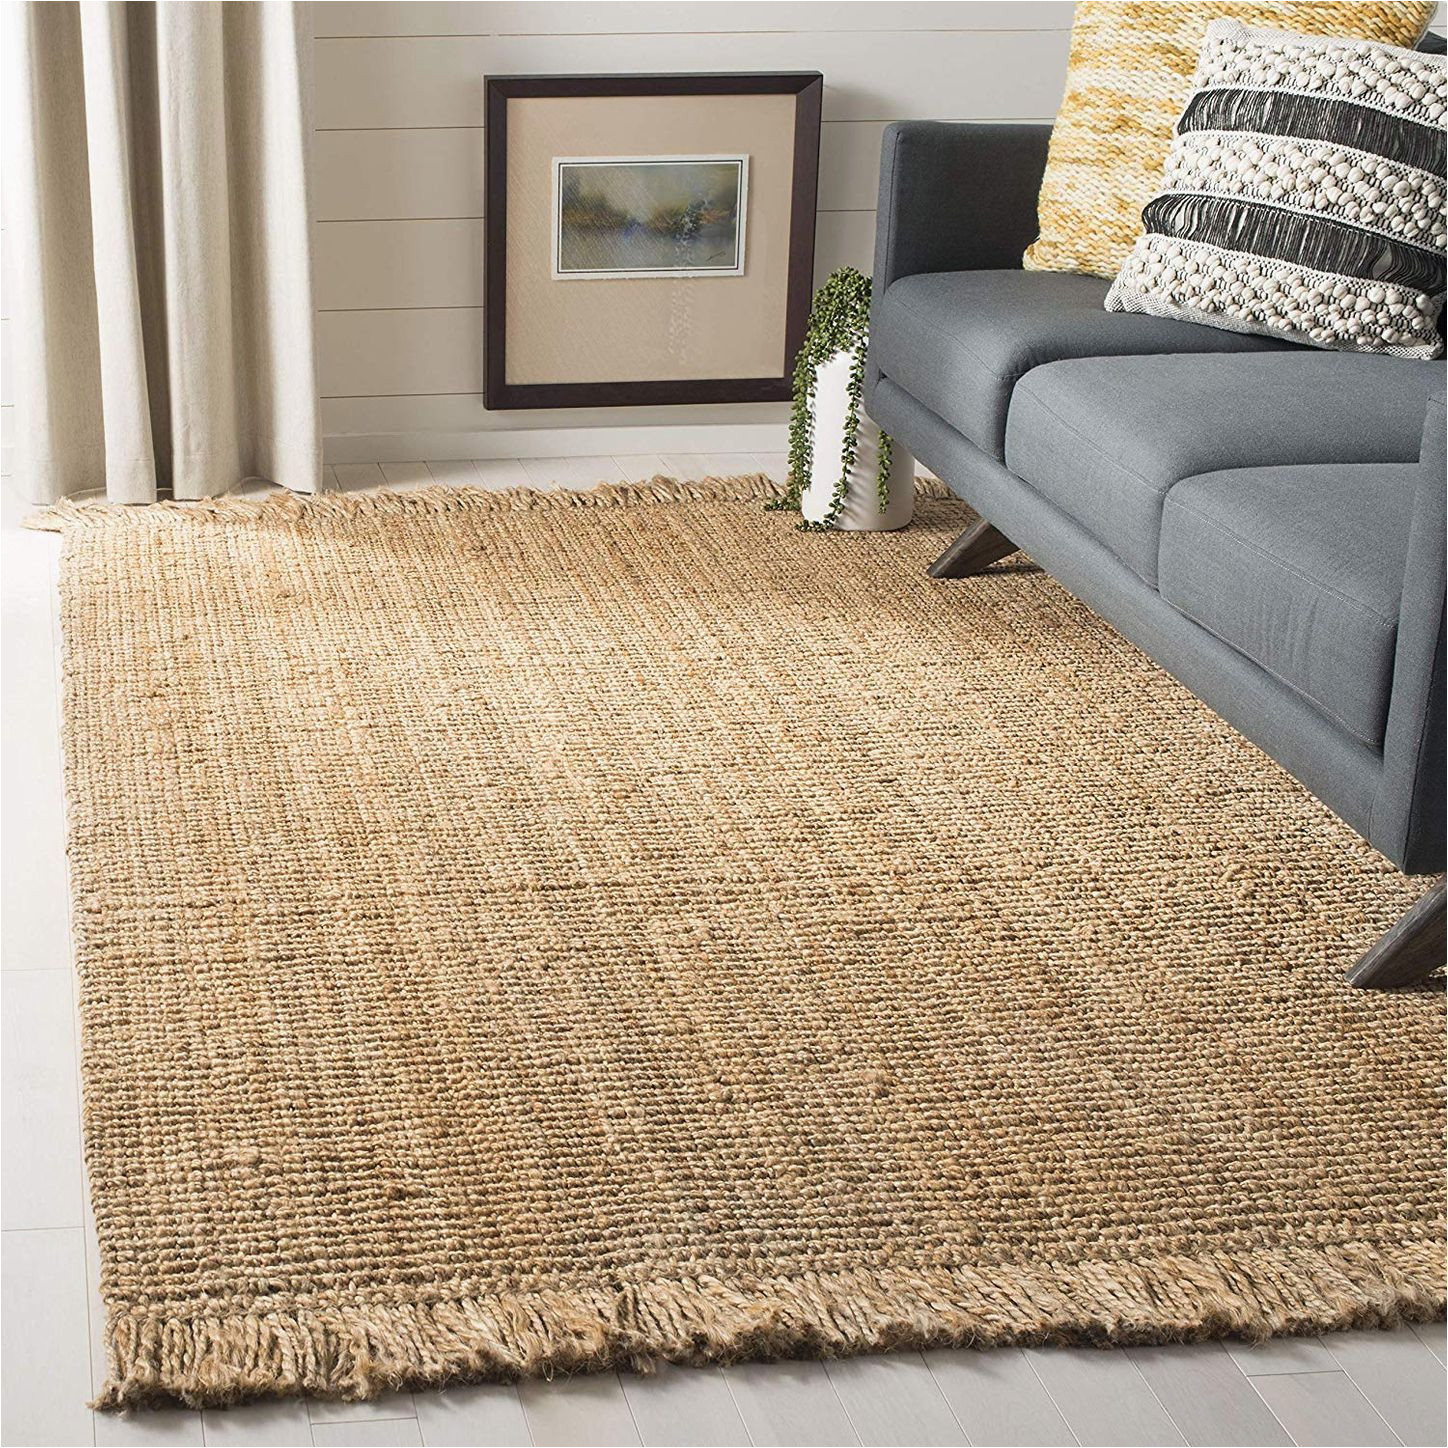 Best Place for area Rugs Near Me 16 Best Sisal, Jute, and Abaca Rugs 2022 the Strategist